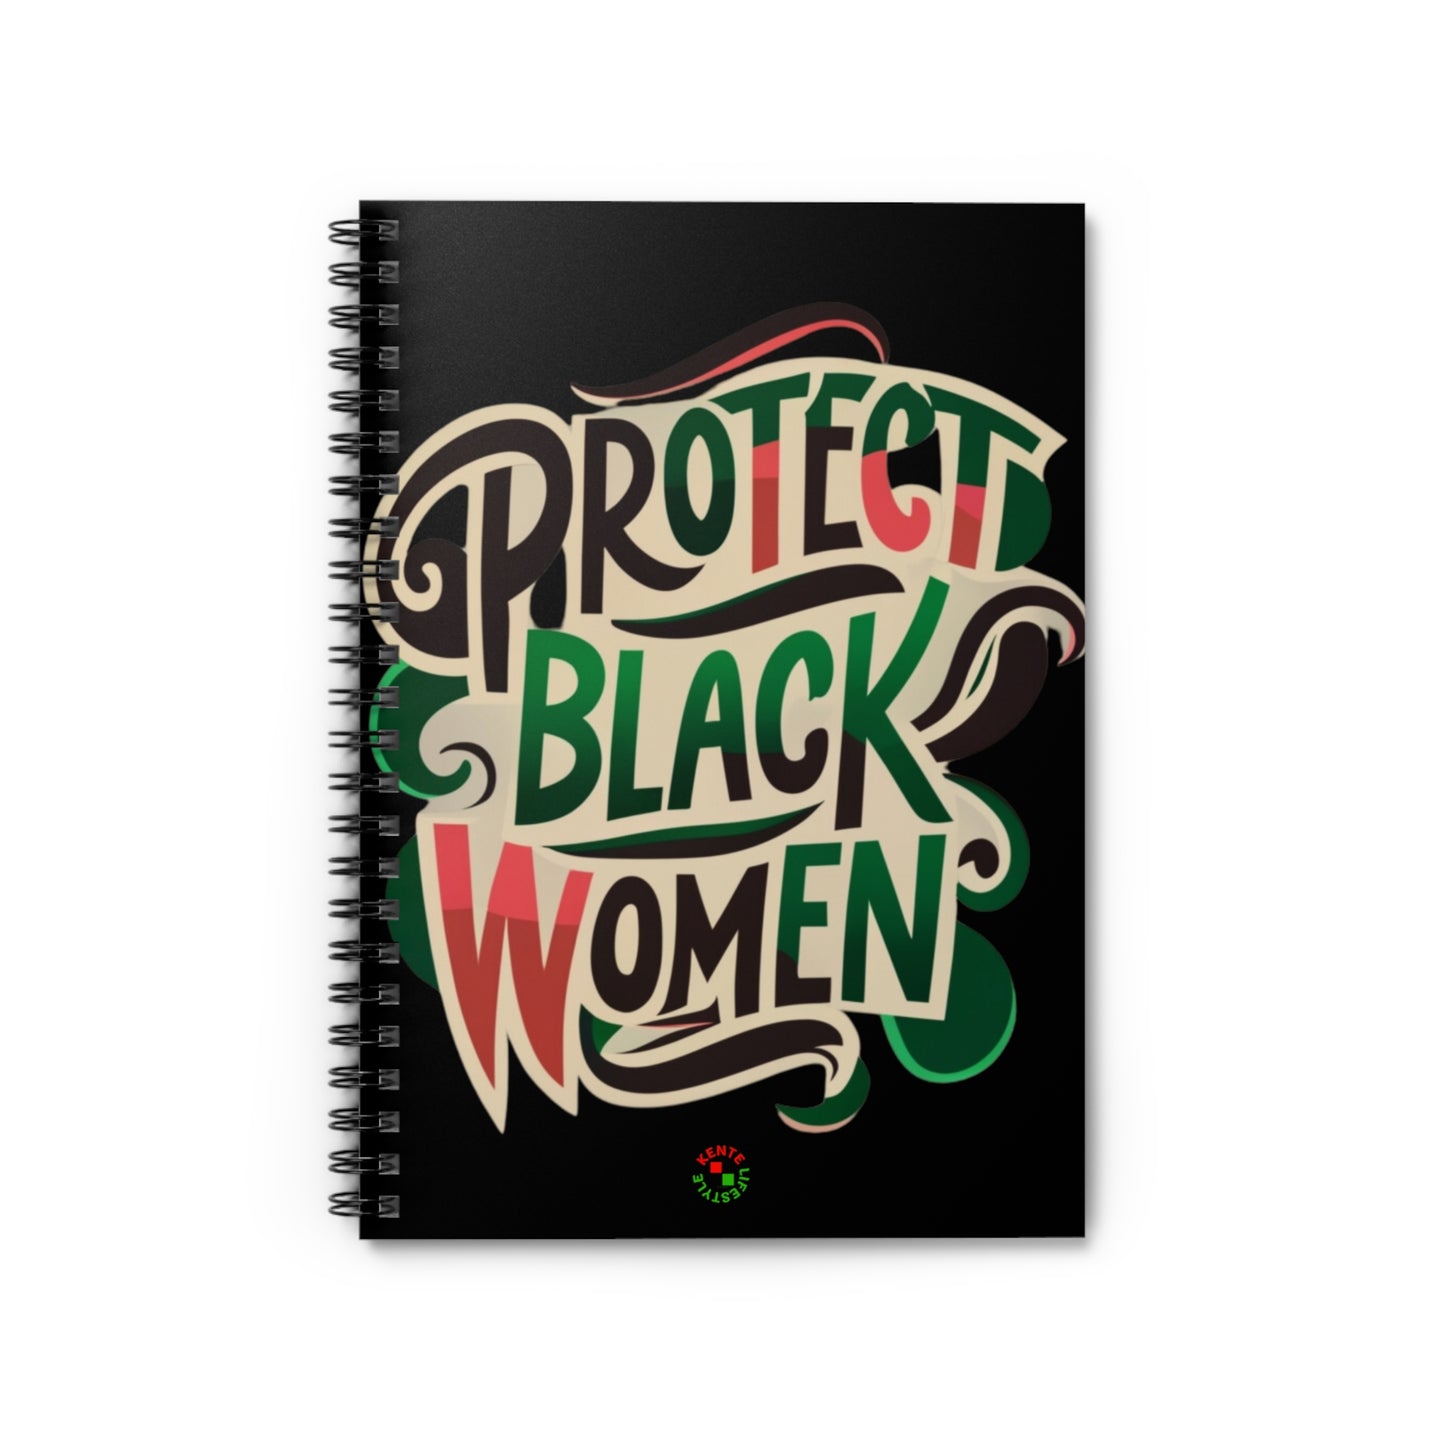 Protect Black Women - Spiral Notebook (Ruled Line)